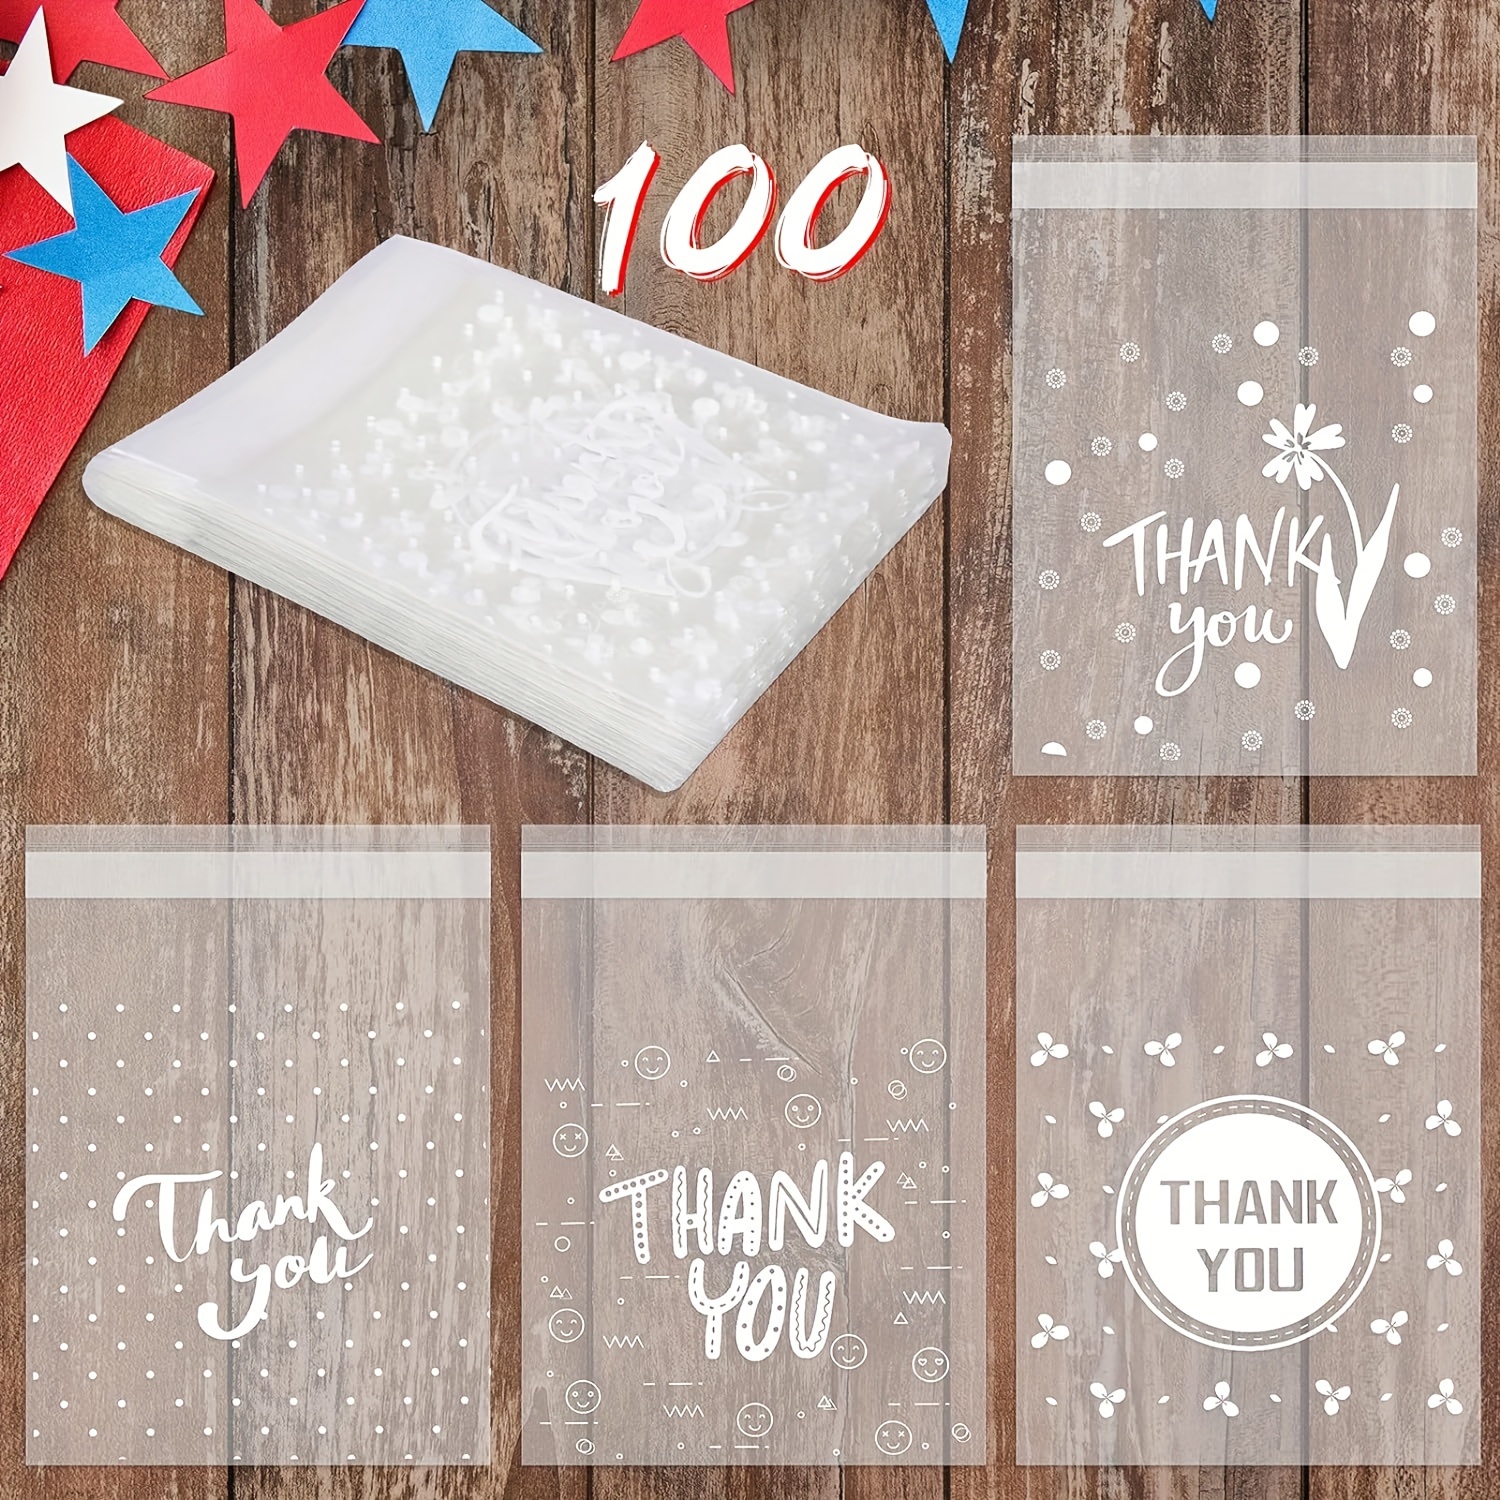 

100-piece Self-adhesive Thank You Treat Bags - 3.9x5.1" Plastic Candy & Dessert Pieceaging For Birthday, Summer Parties & Favors